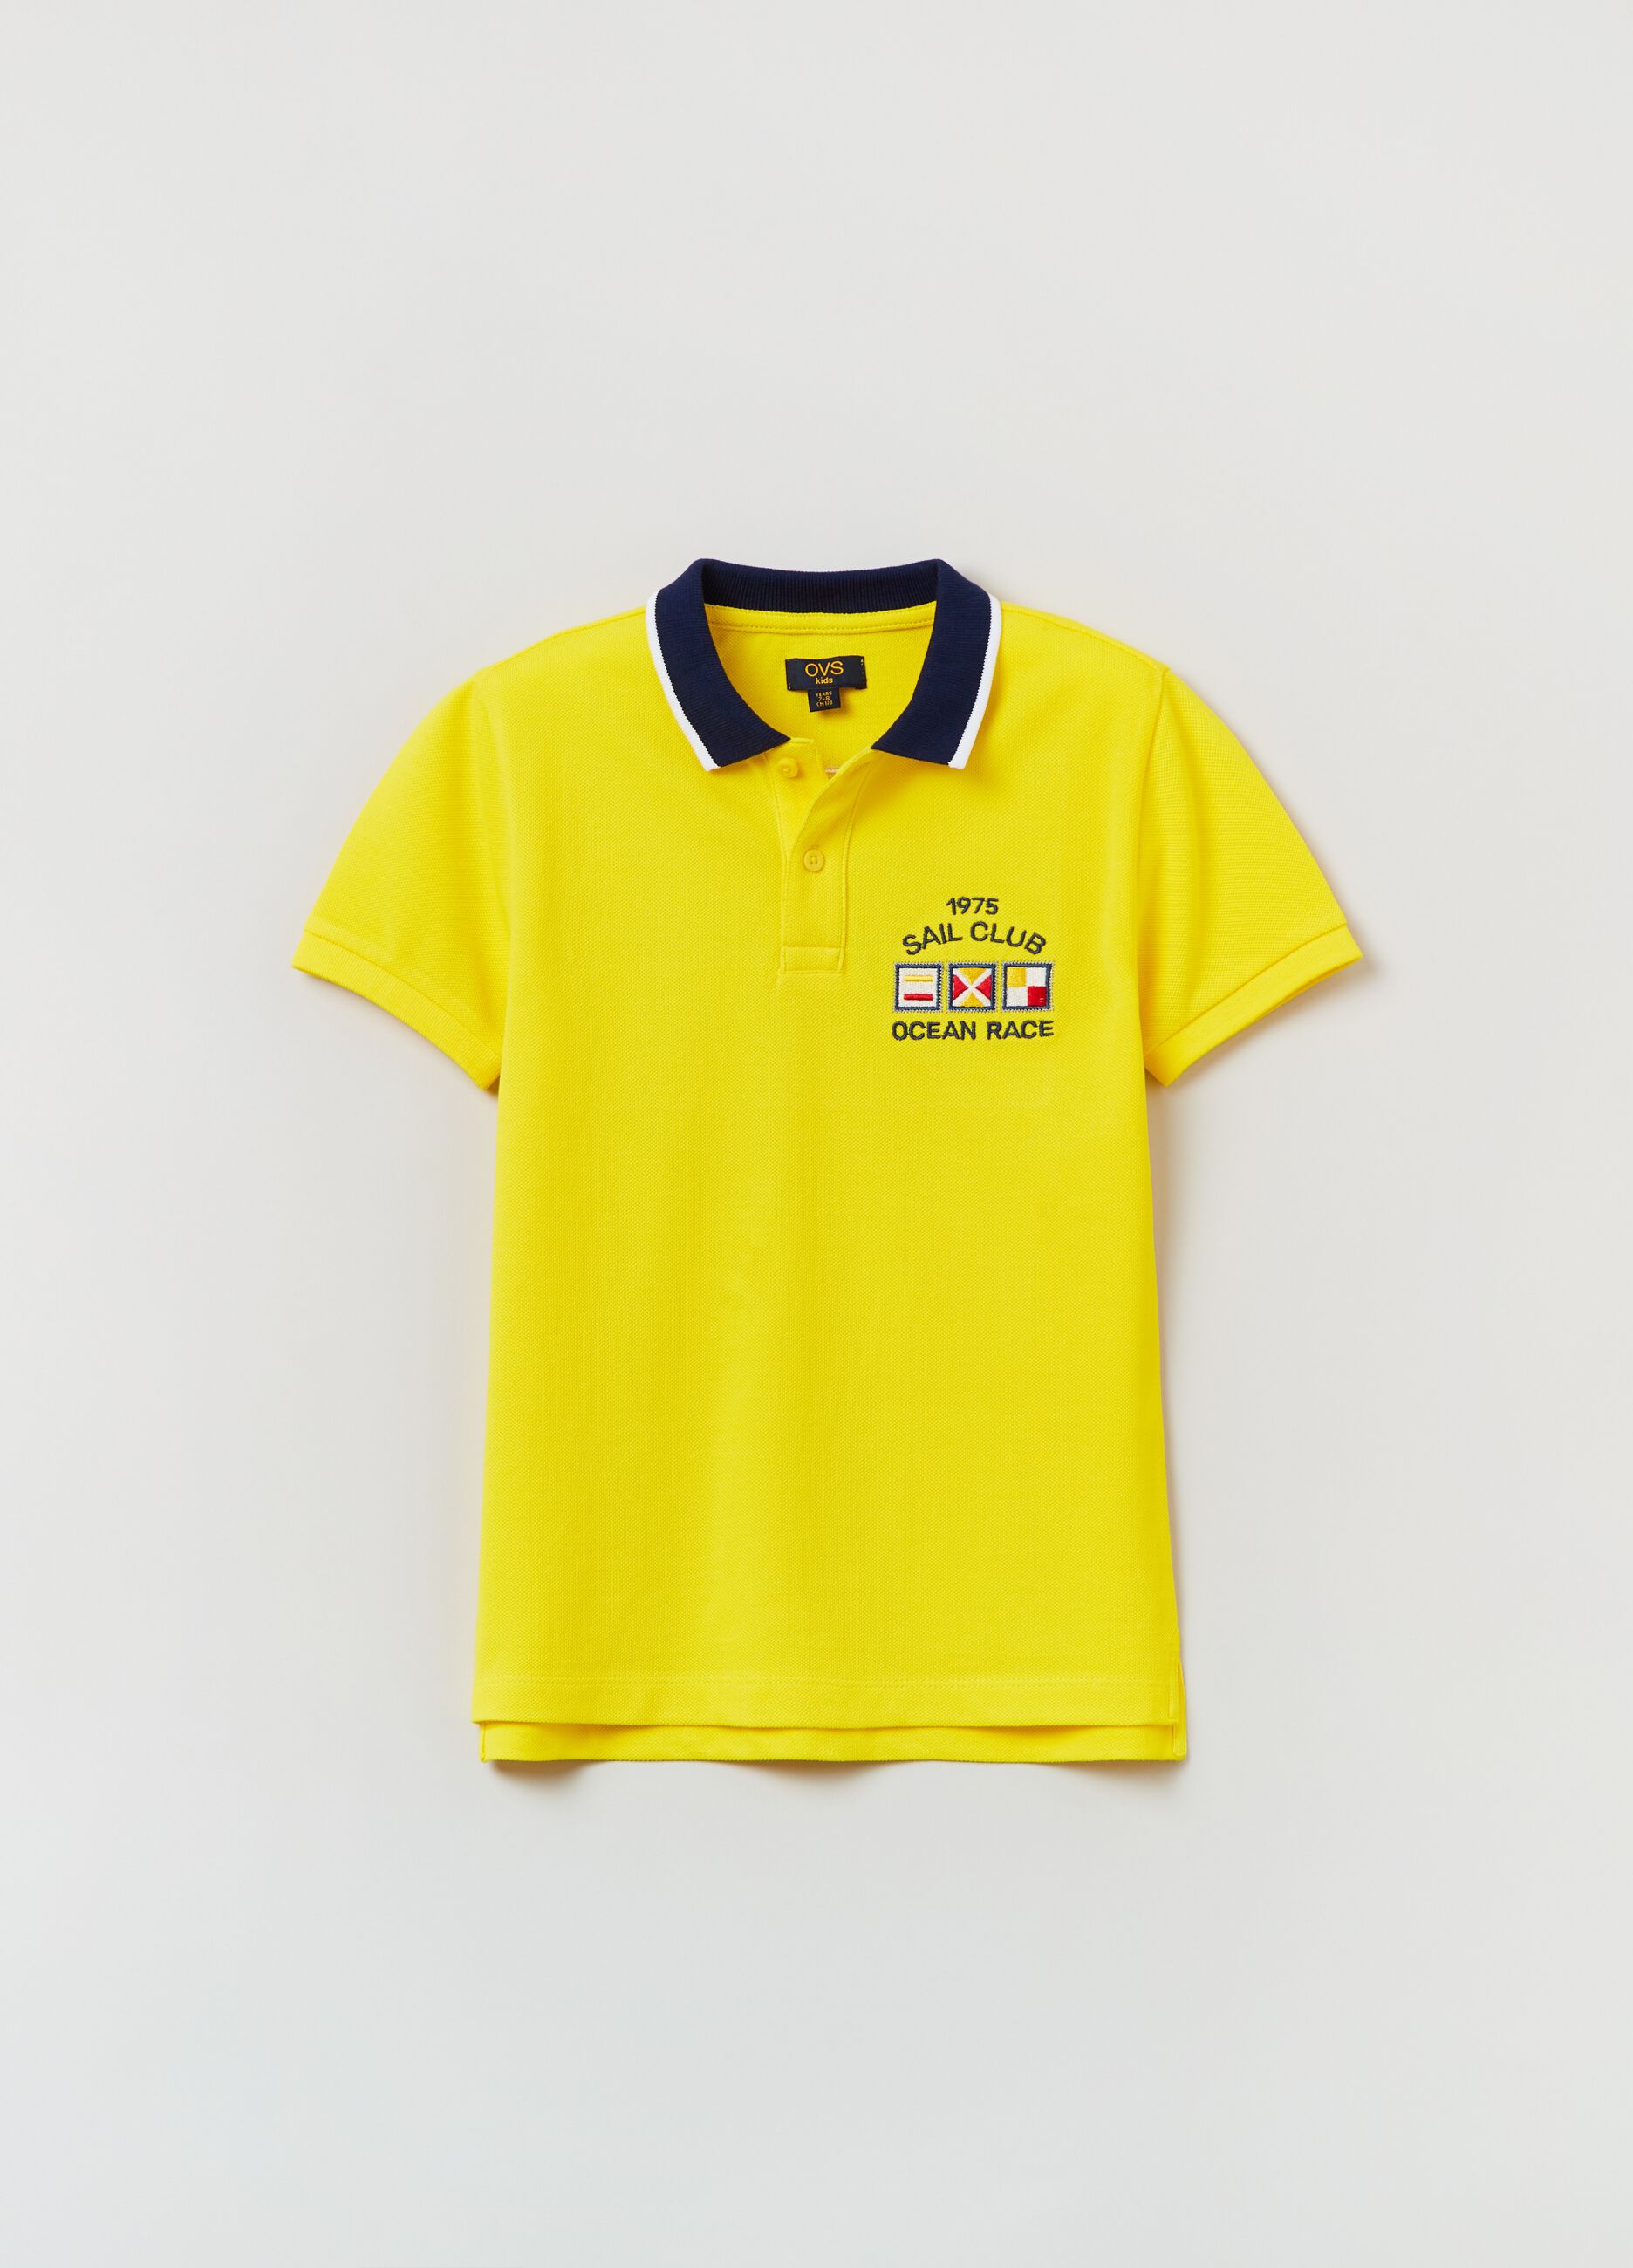 Cotton piquet polo shirt with lettering patch